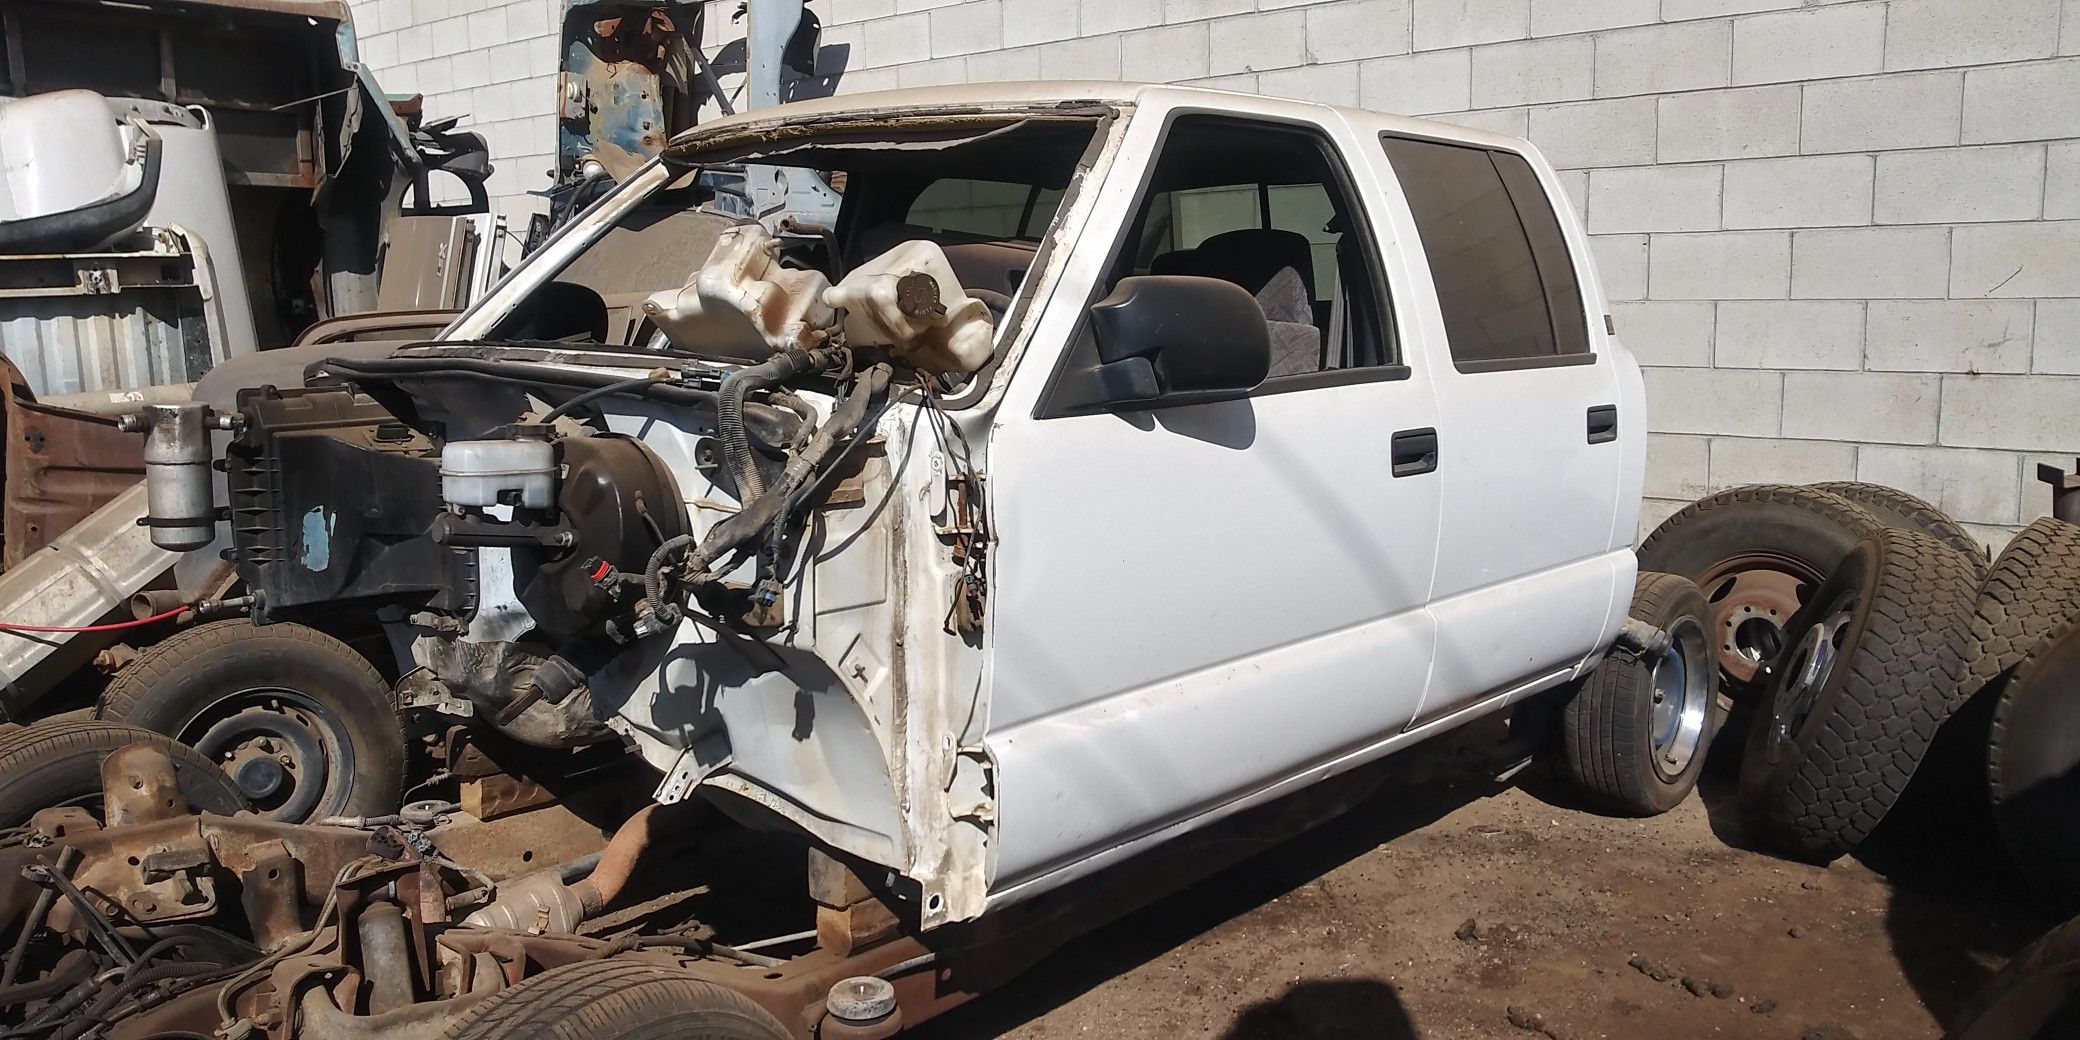 (PARTS ONLY) 2001 crew cab s10 4x4